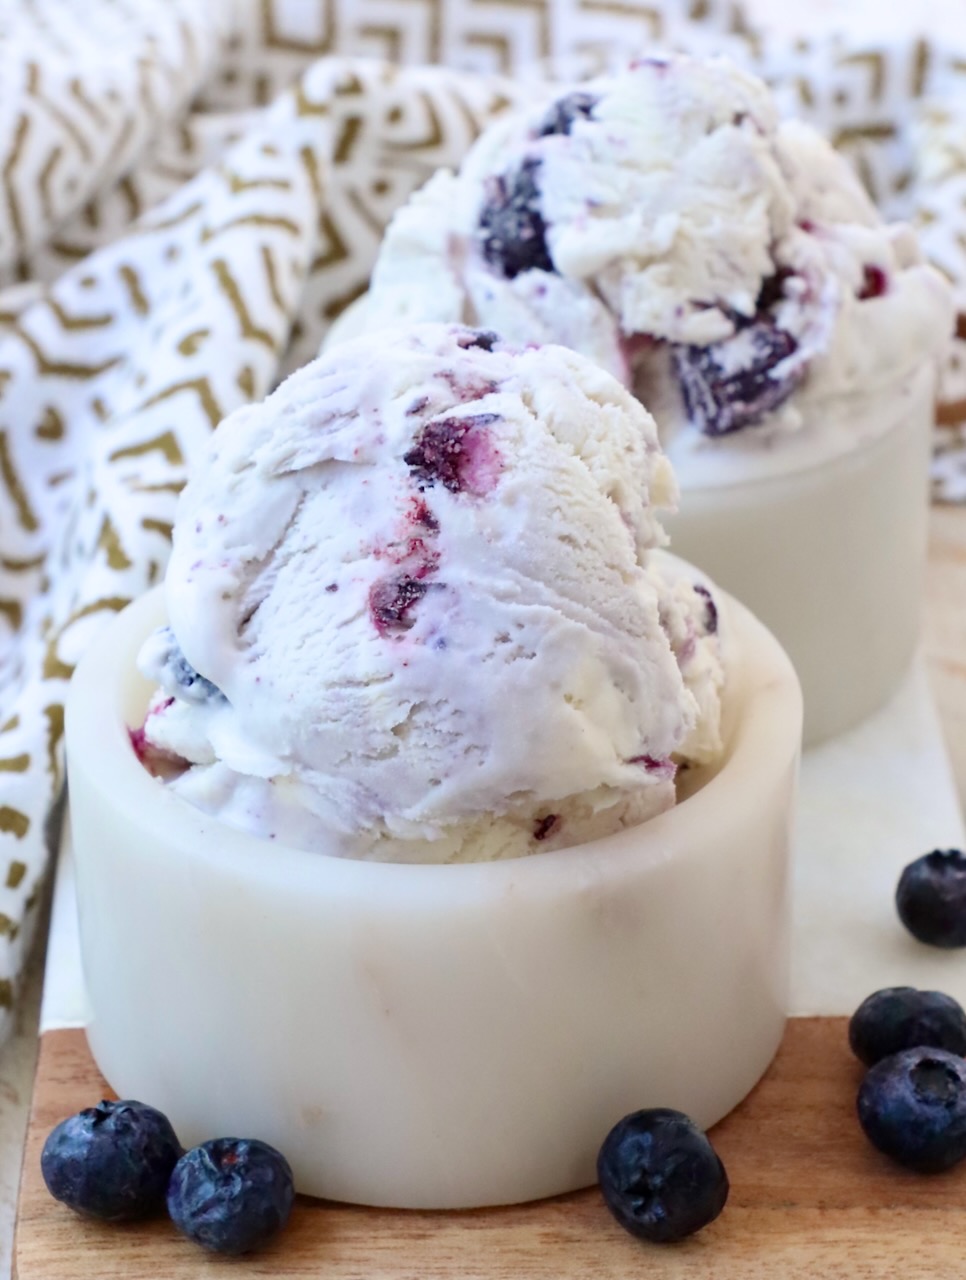 scoops of blueberry ice cream in small bowls